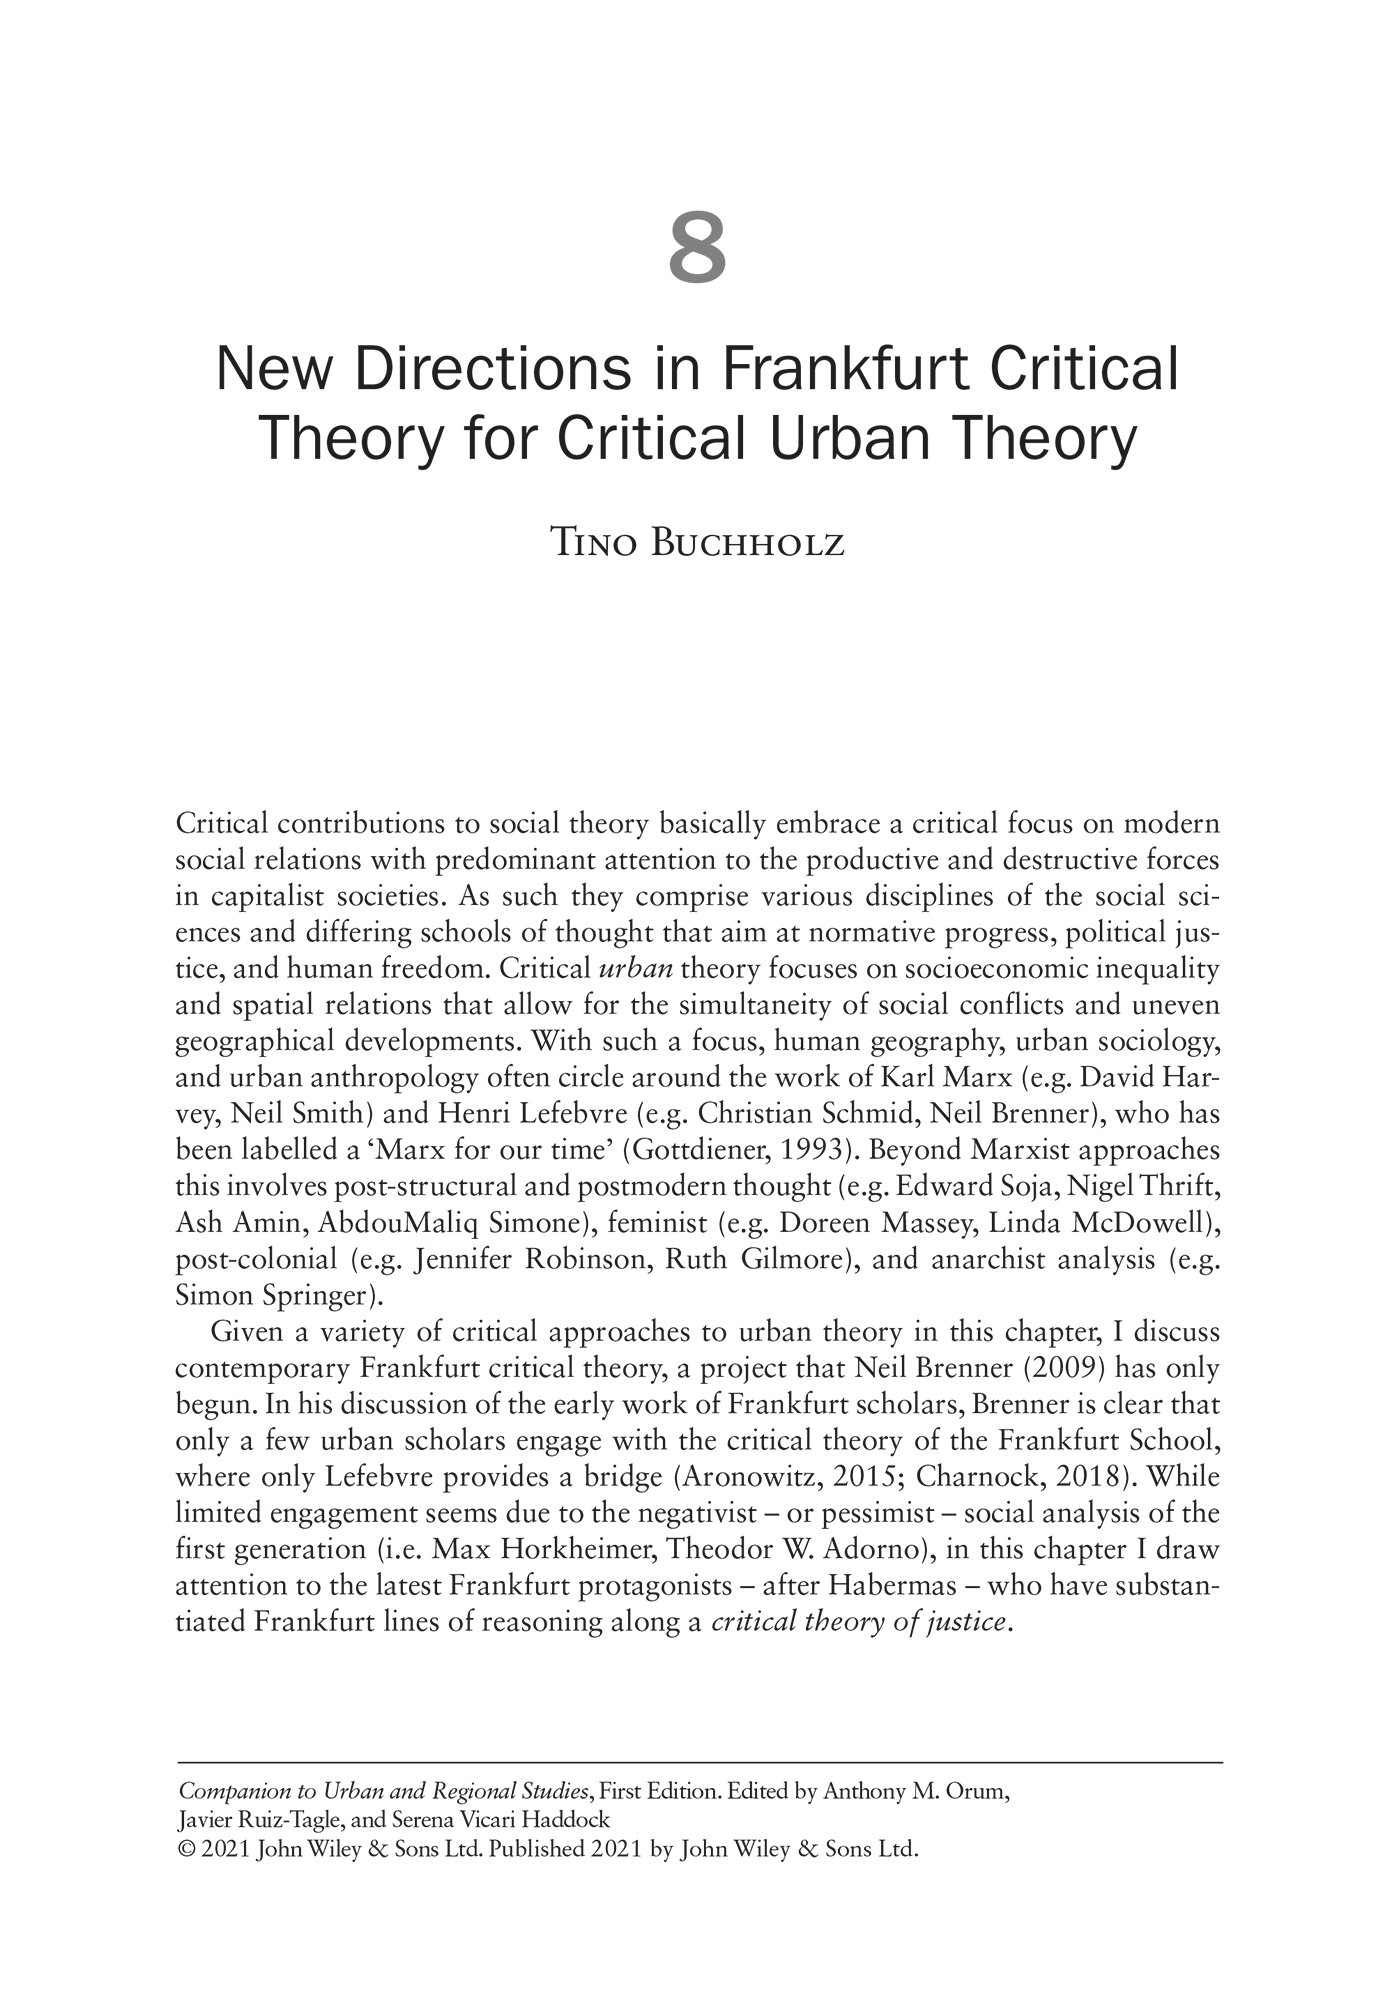 Buchholz 2021_New Directions in Frankfurt Critical Theory-1